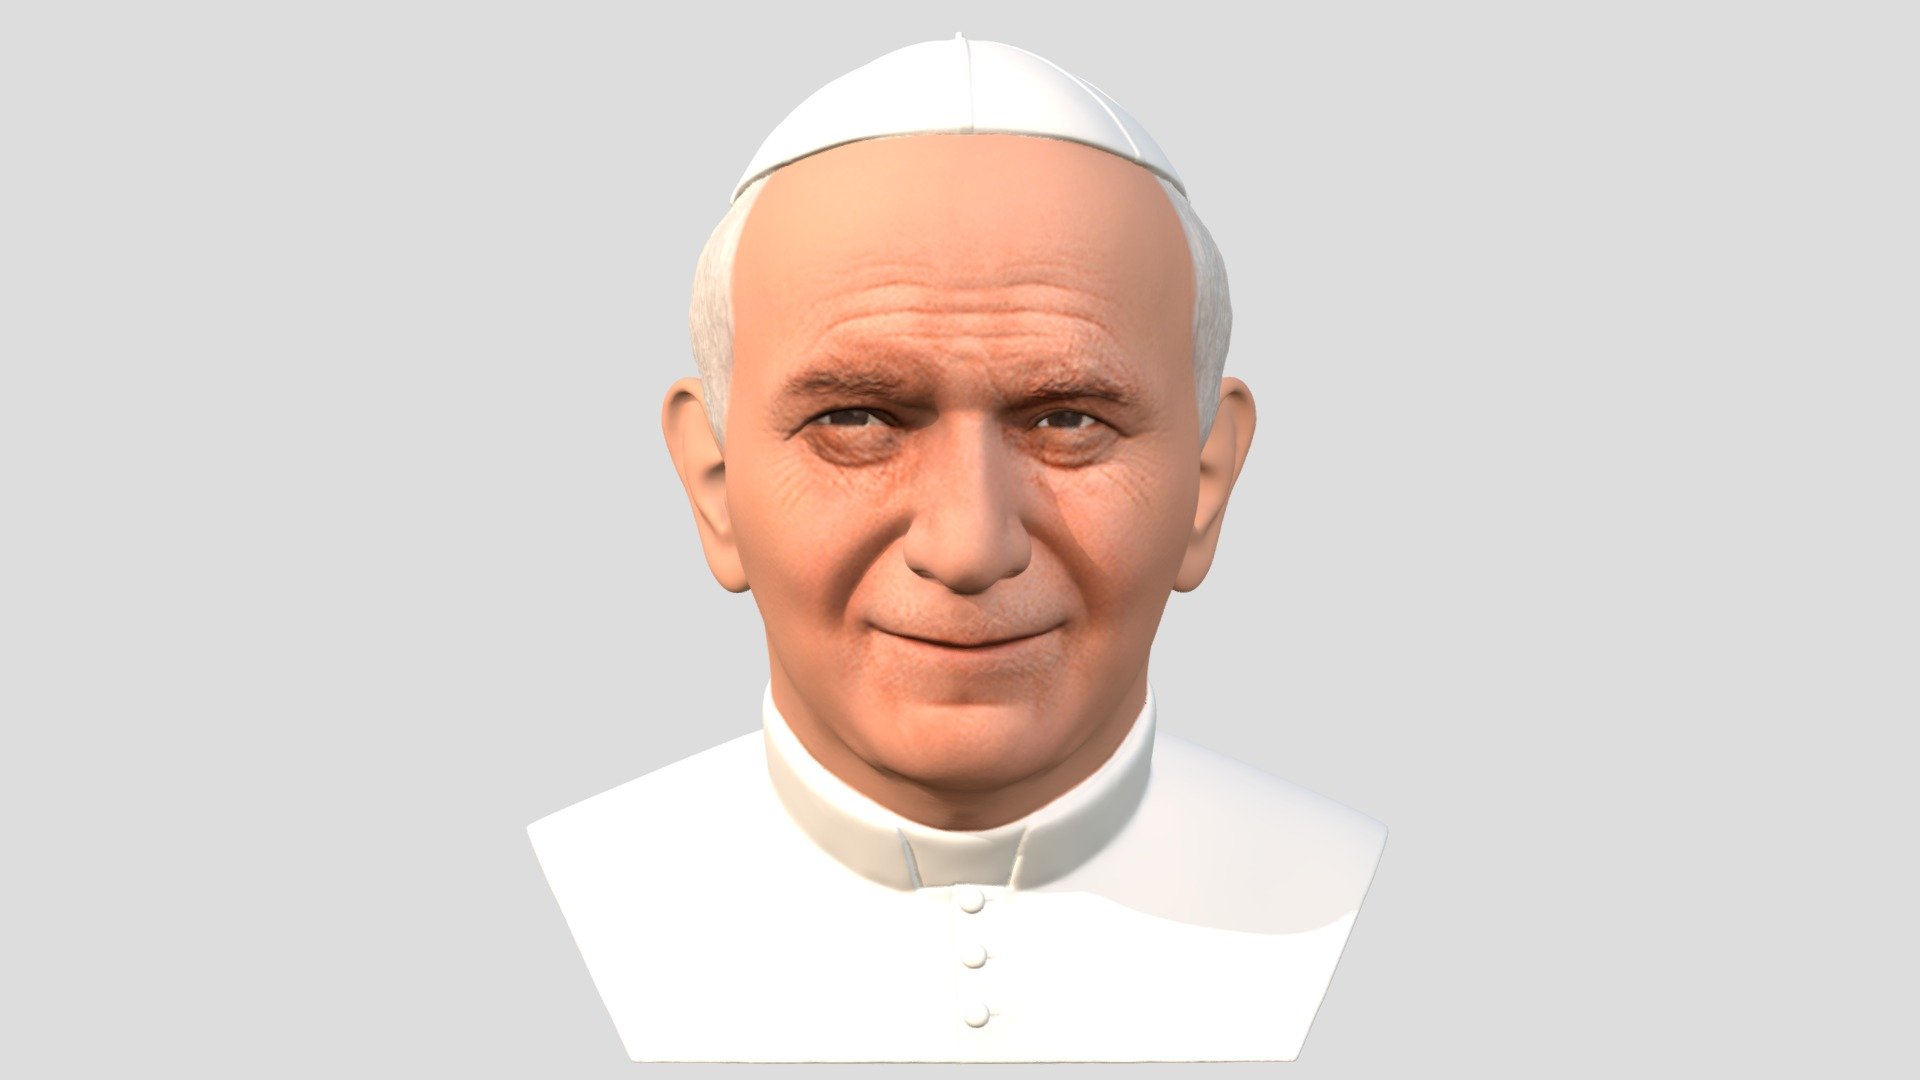 Here is bust Pope John Paul 2 3D model ready for full color 3D printing. The model current size is 5 cm height, but you are free to scale it. Zip file contains obj with texture in png. The model was created in ZBrush, Mudbox and Photoshop.

If you have any questions please don’t hesitate to contact me. I will respond you ASAP. I encourage you to check my other celebrity 3D models 3d model